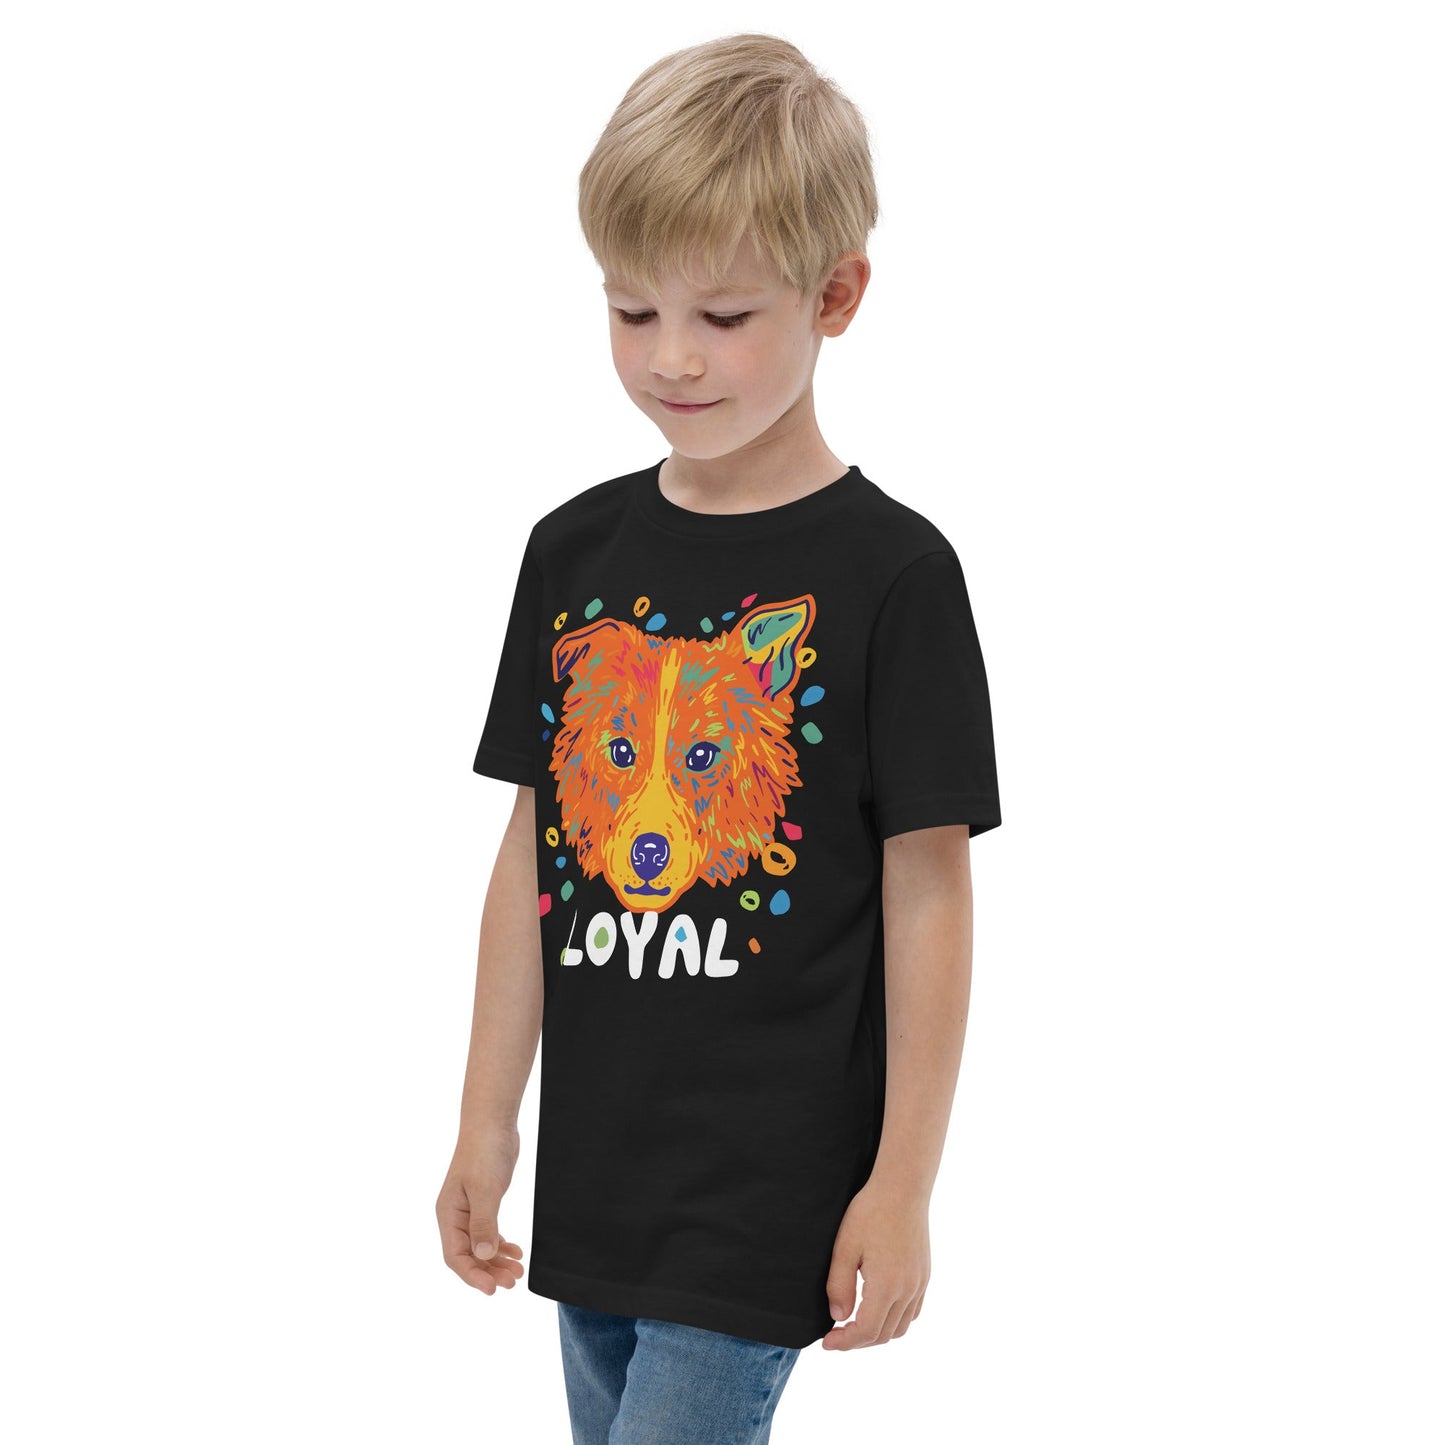 Loyal Dog Kids T-Shirt T-Shirt from Wildly Bright